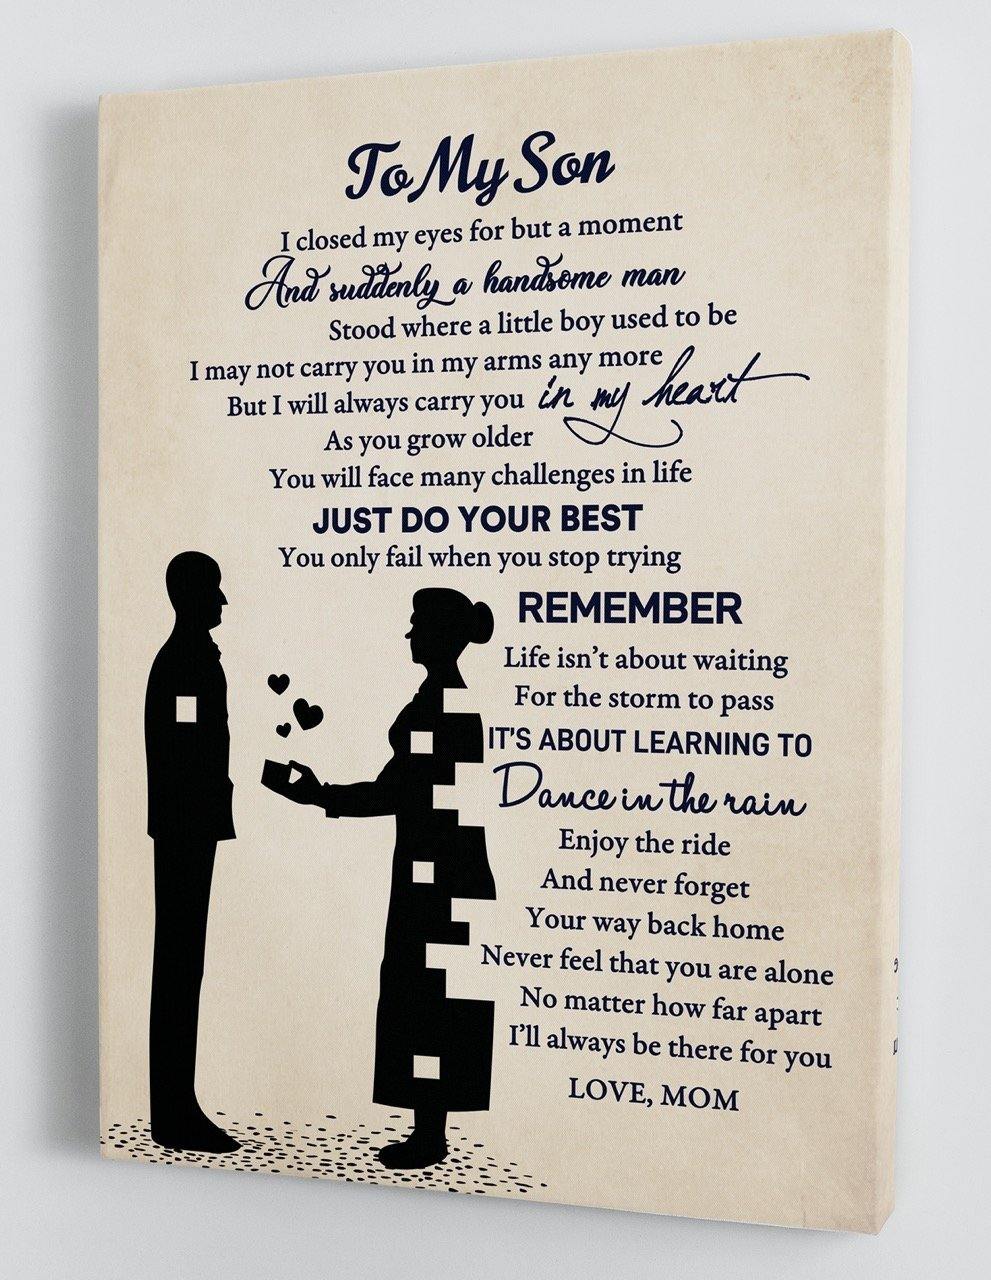 To My Son - From Mom - Framed Canvas Gift MS030 - DivesArt LLC